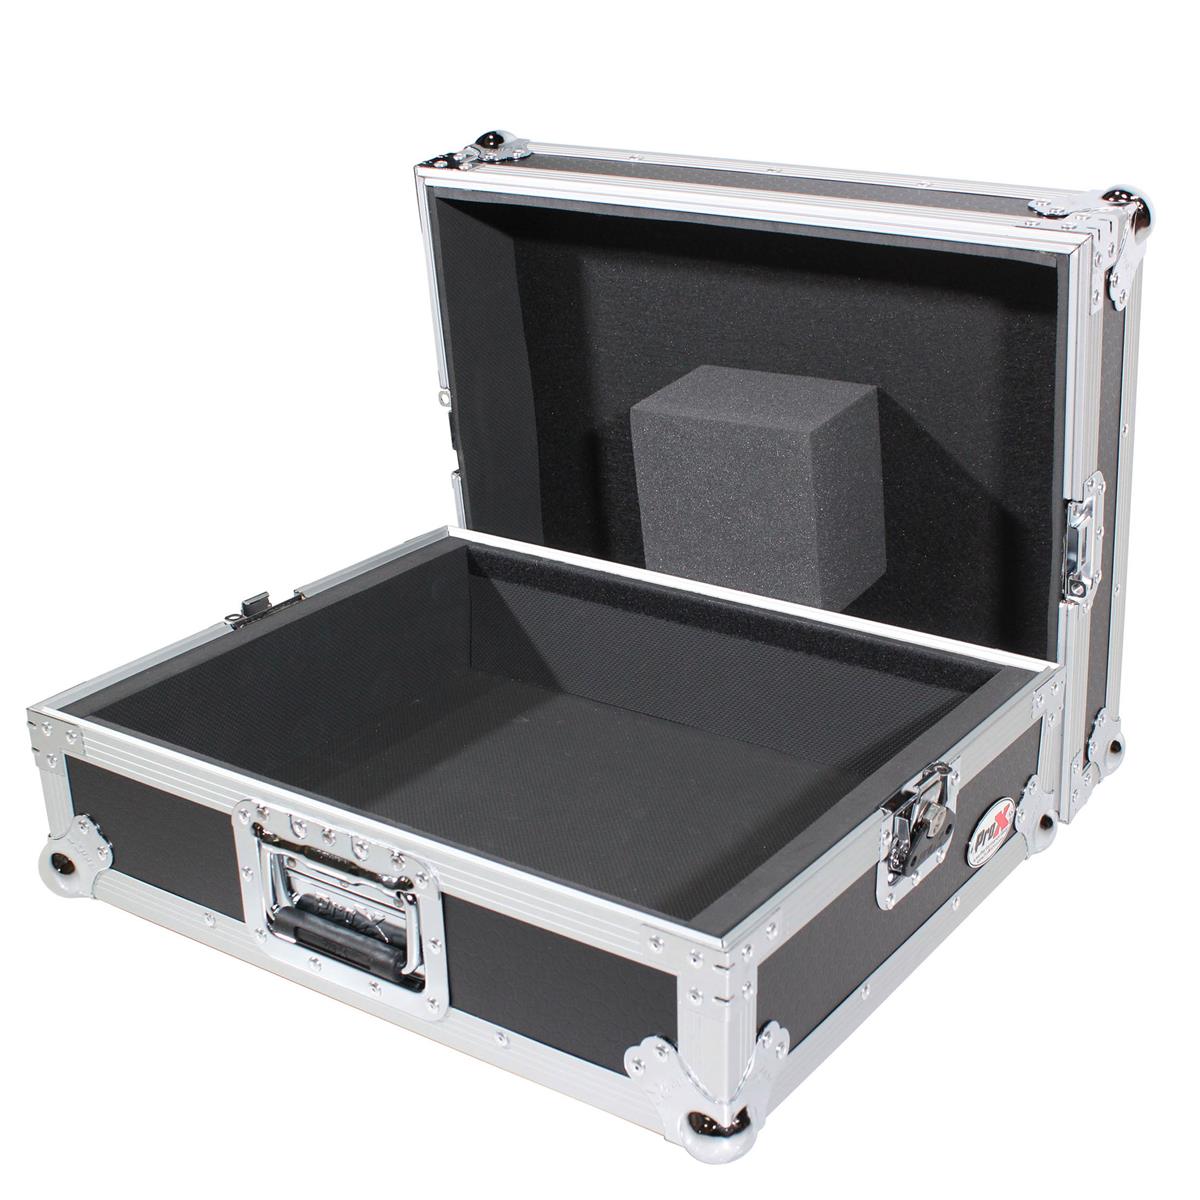 Image of ProX T-TT Turntable Case for Classic Technics SL1200 Turntable